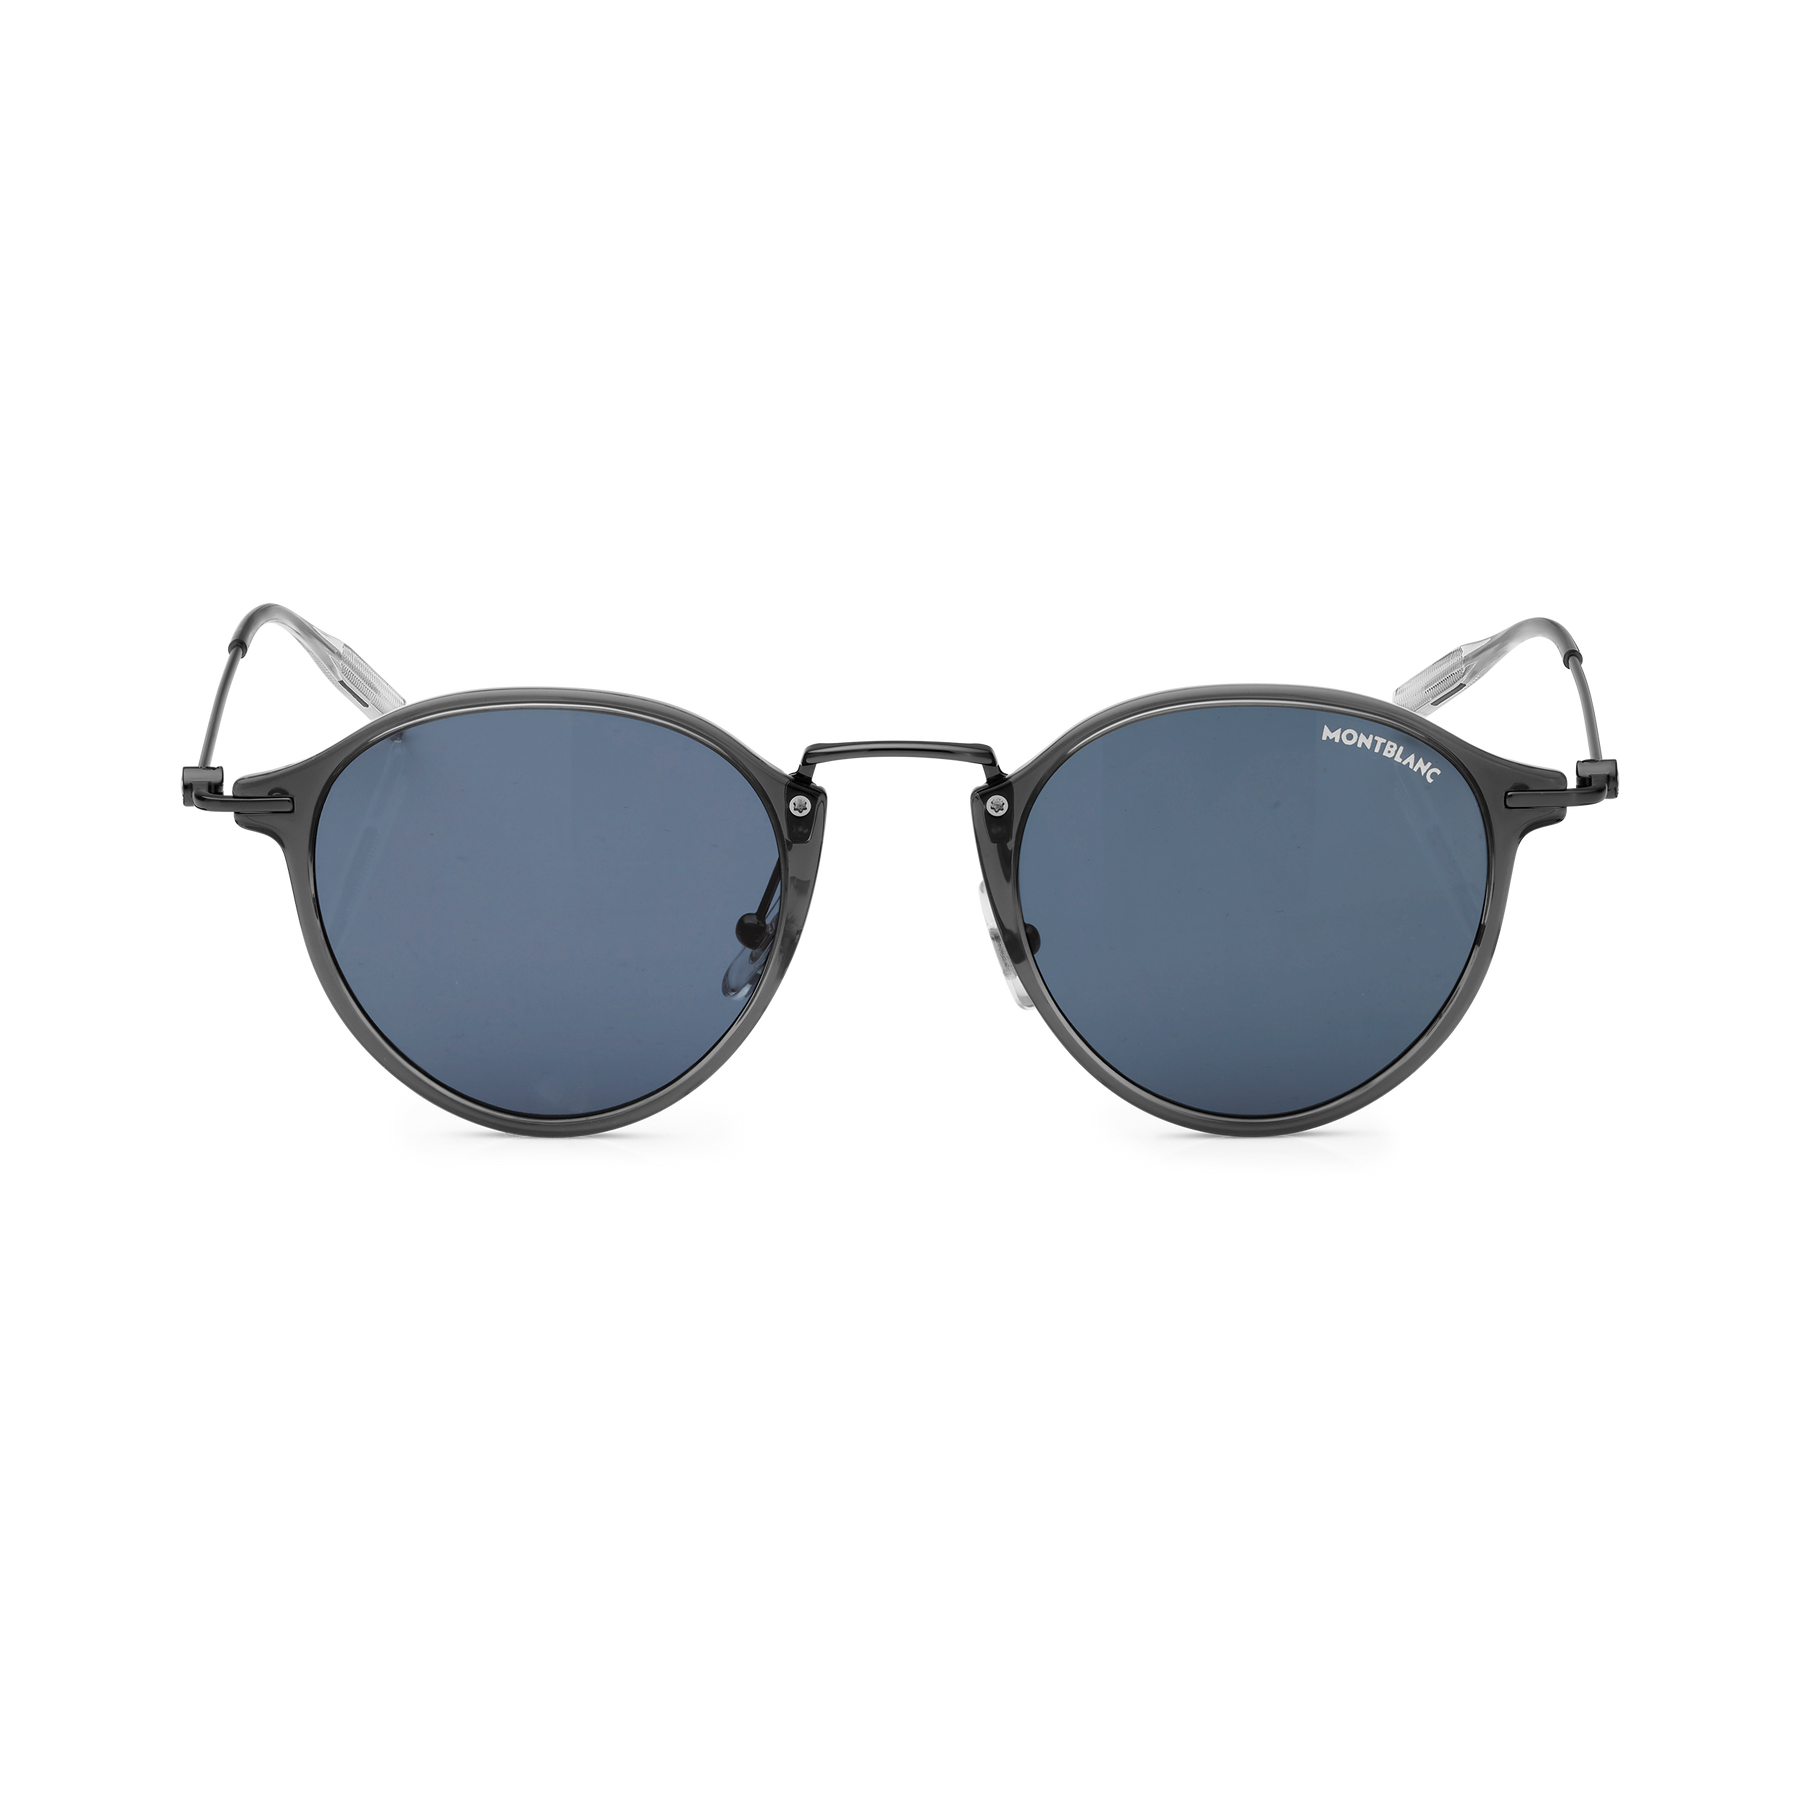 Round Sunglasses with Gray Injected Frame